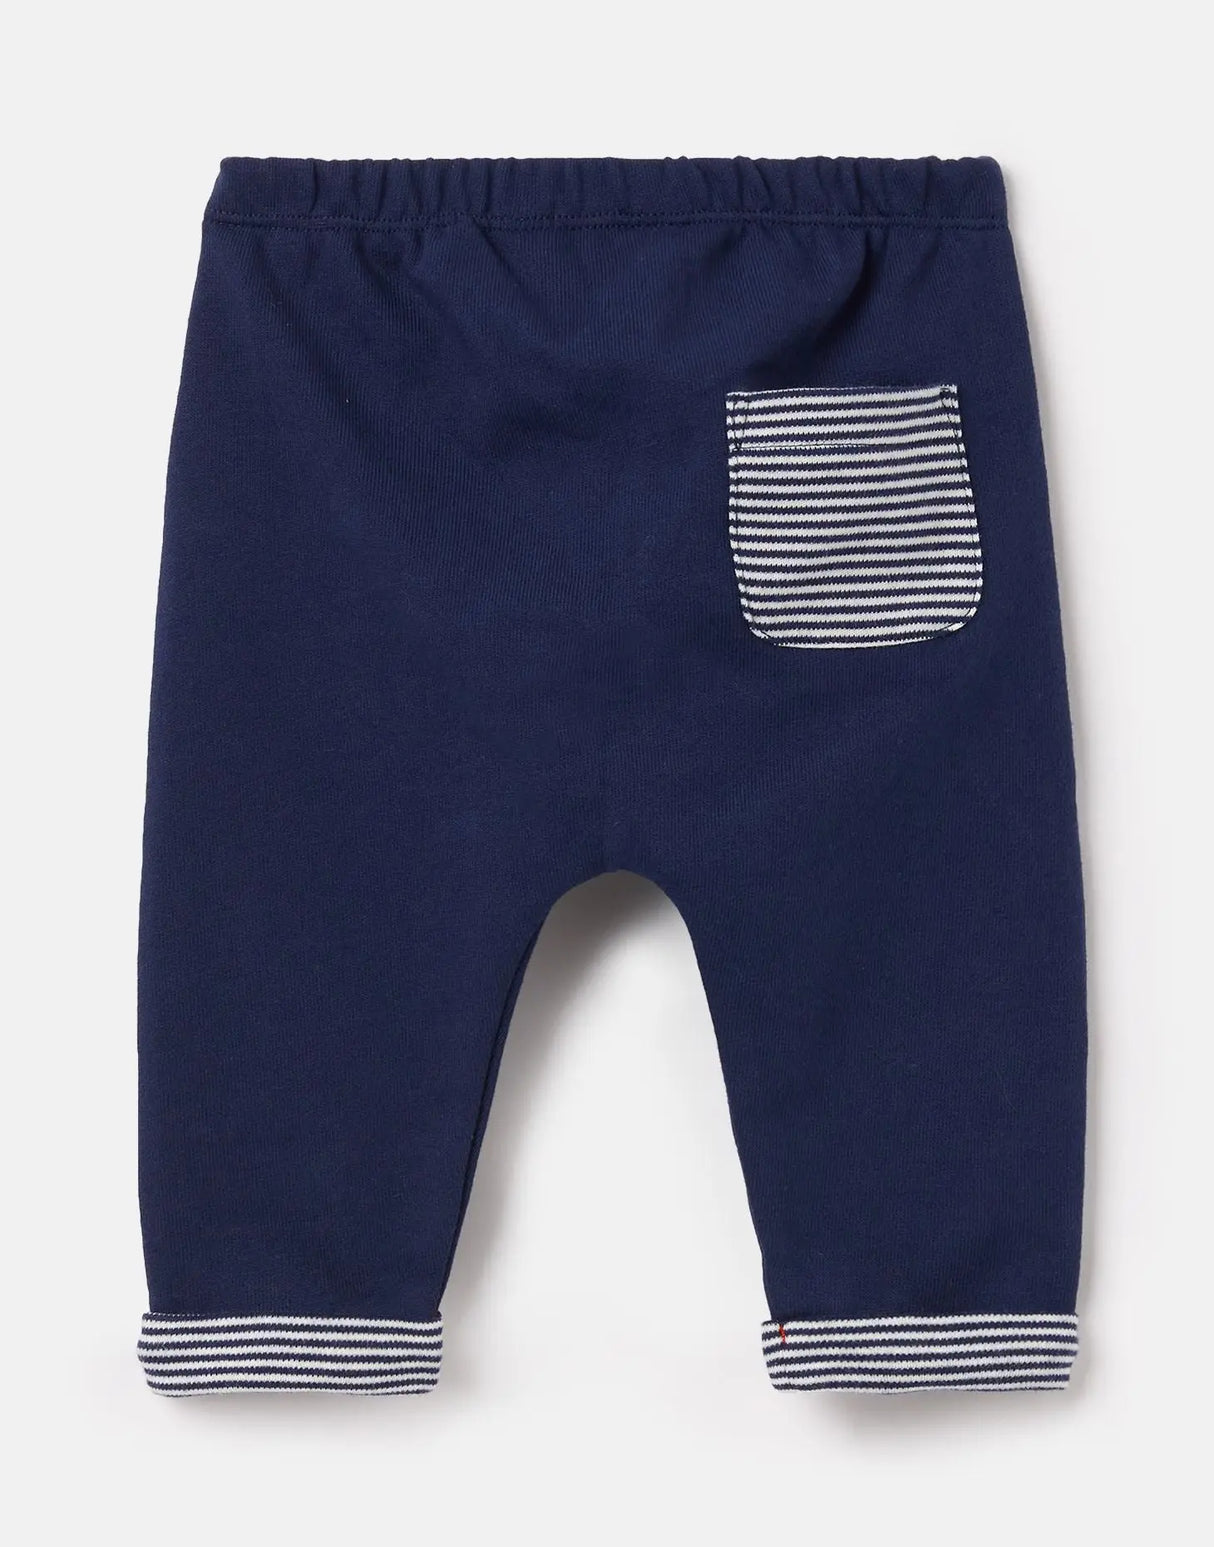 Grove Character Seamless Pants | Joules - Joules